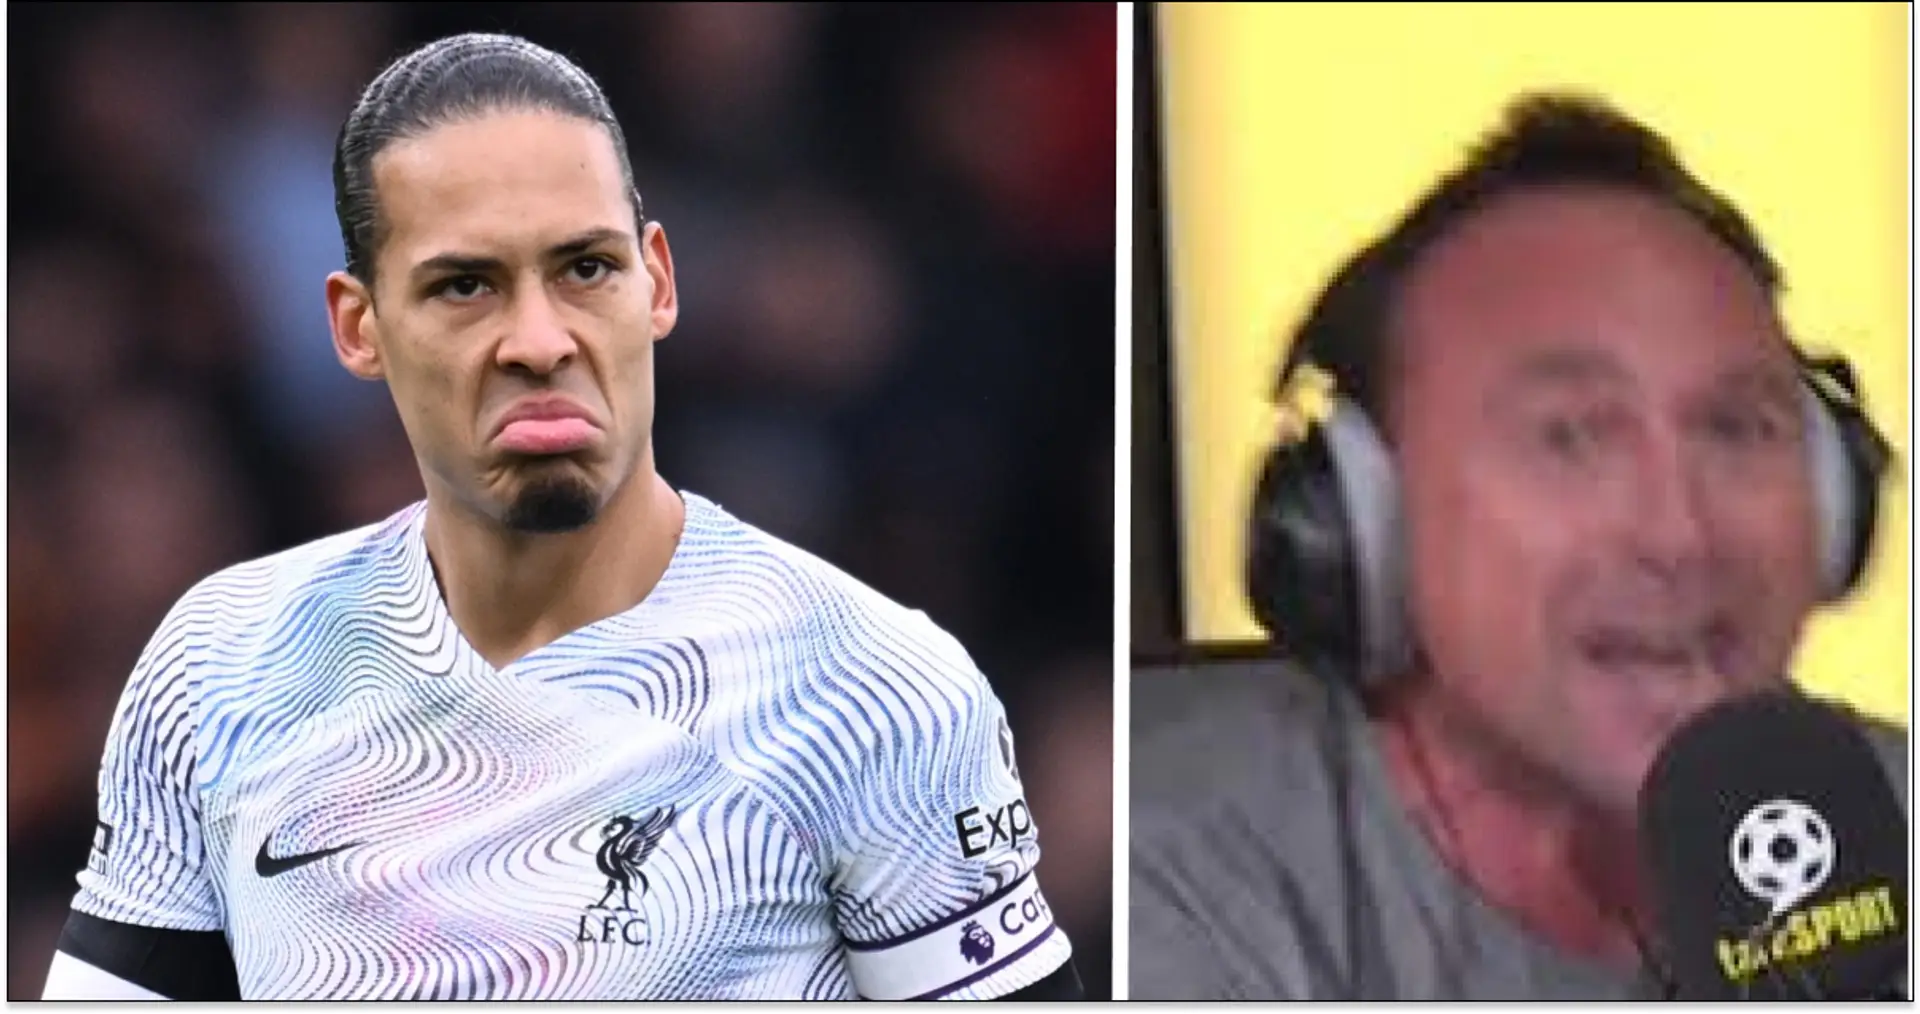 'Van Dijk can't lace John Terry's and Rio Ferdinand's boots', says ex-defender with 66 EPL apps and 0 trophies